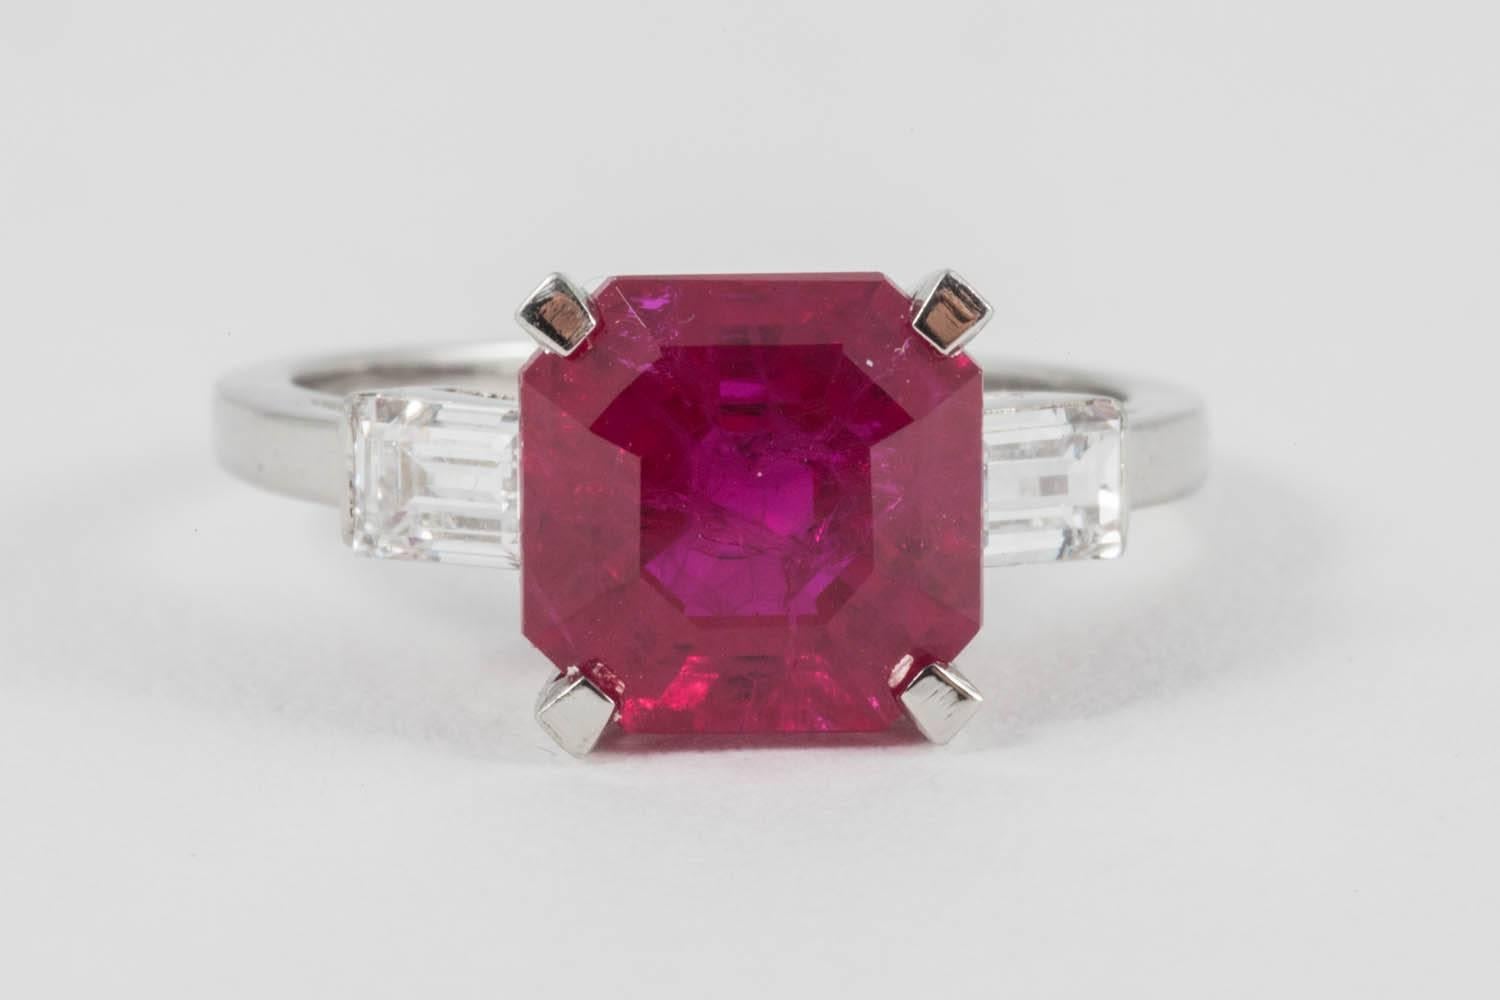 Using the vintage Art Deco mount we have revived this by setting an ethical Don't Waste Beauty Ruby to it. The ruby is of fine pigeon blood colour, with excellent saturation and weighs approximately 3.25 carats. The 2 shoulder baguette cut diamonds